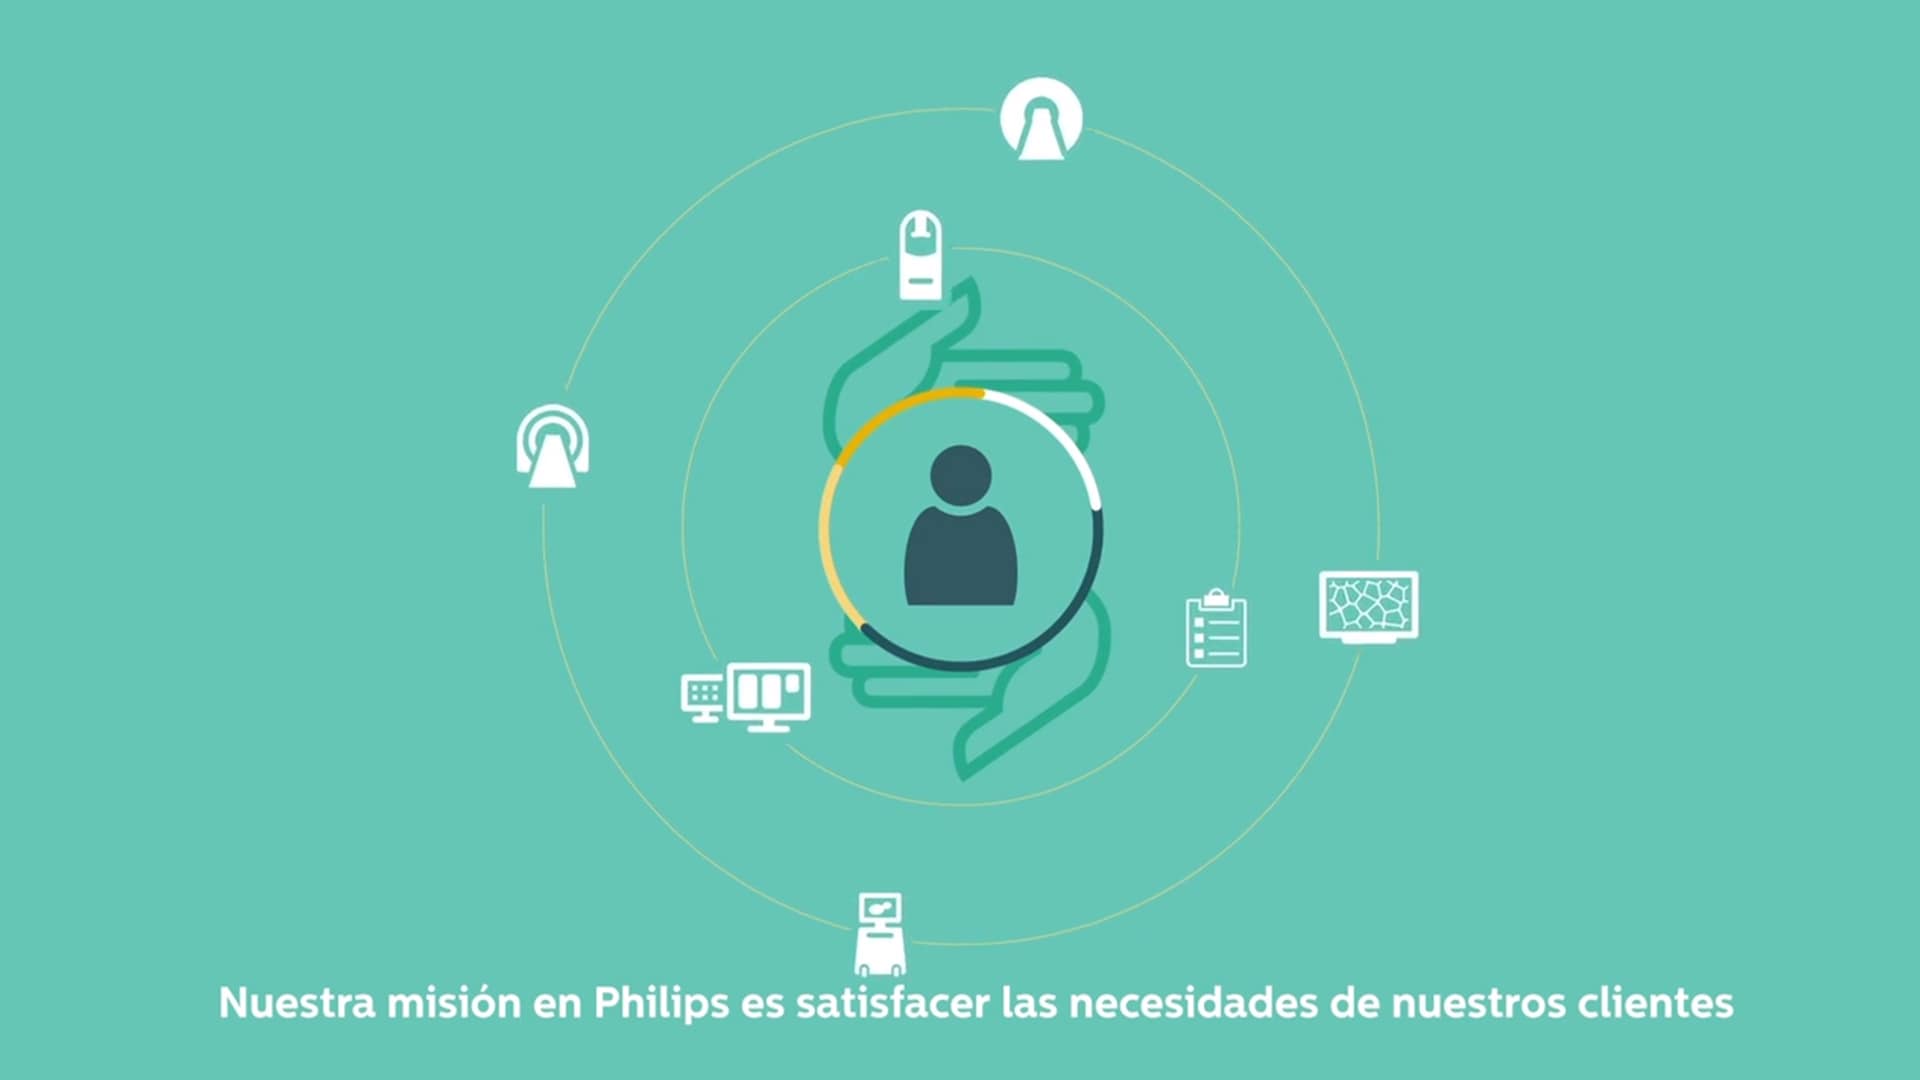 Philips User Experience